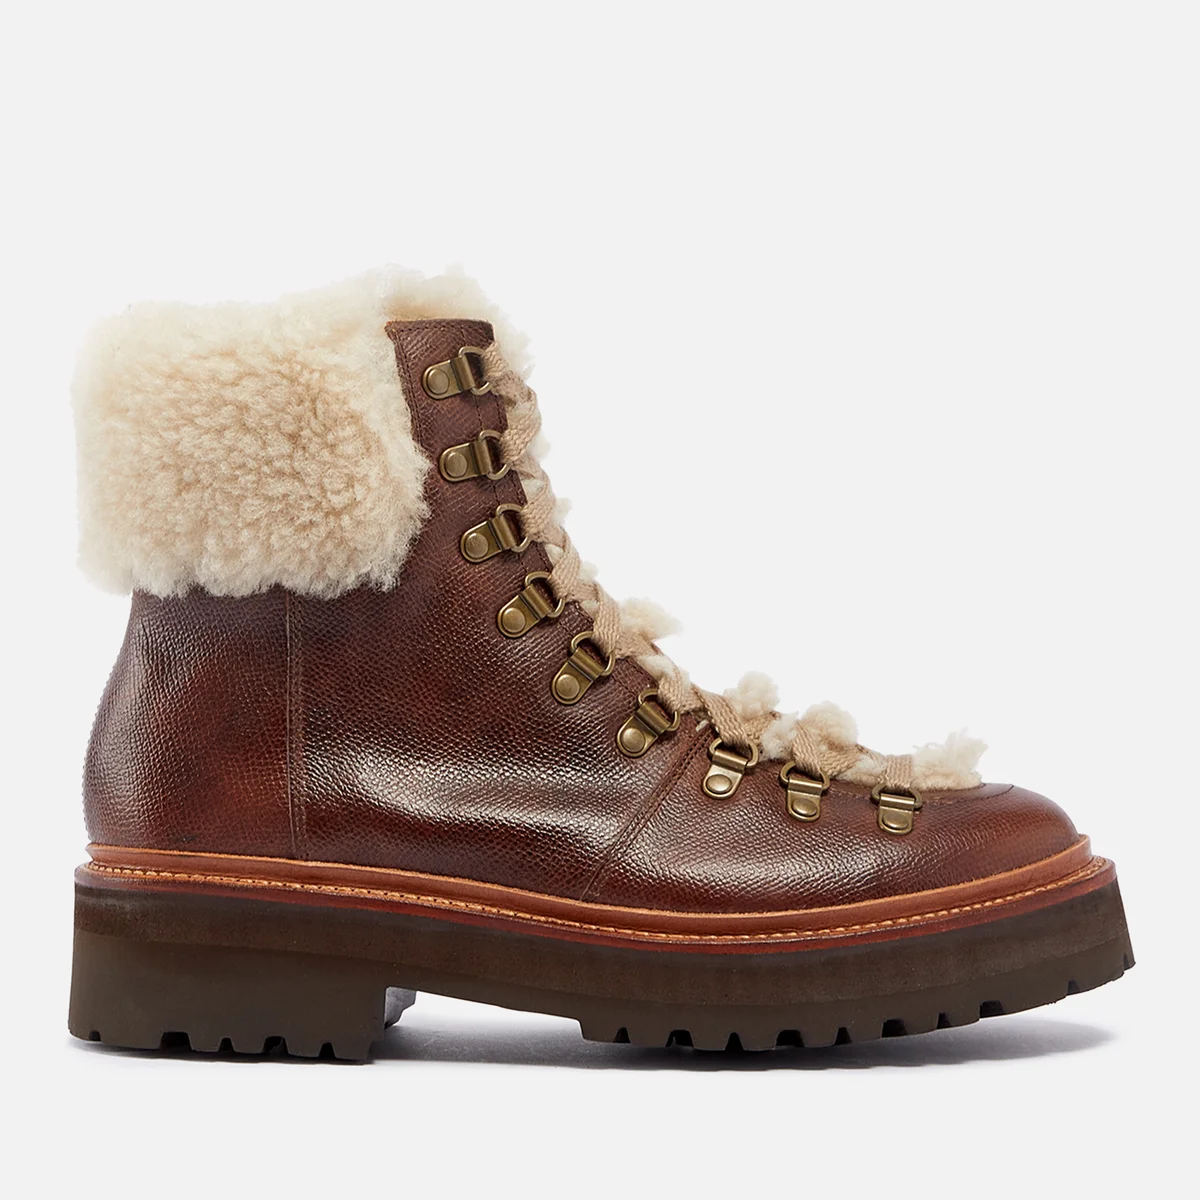 Grenson Nettie Leather and Shearling Hiking-Style Boots Image 1